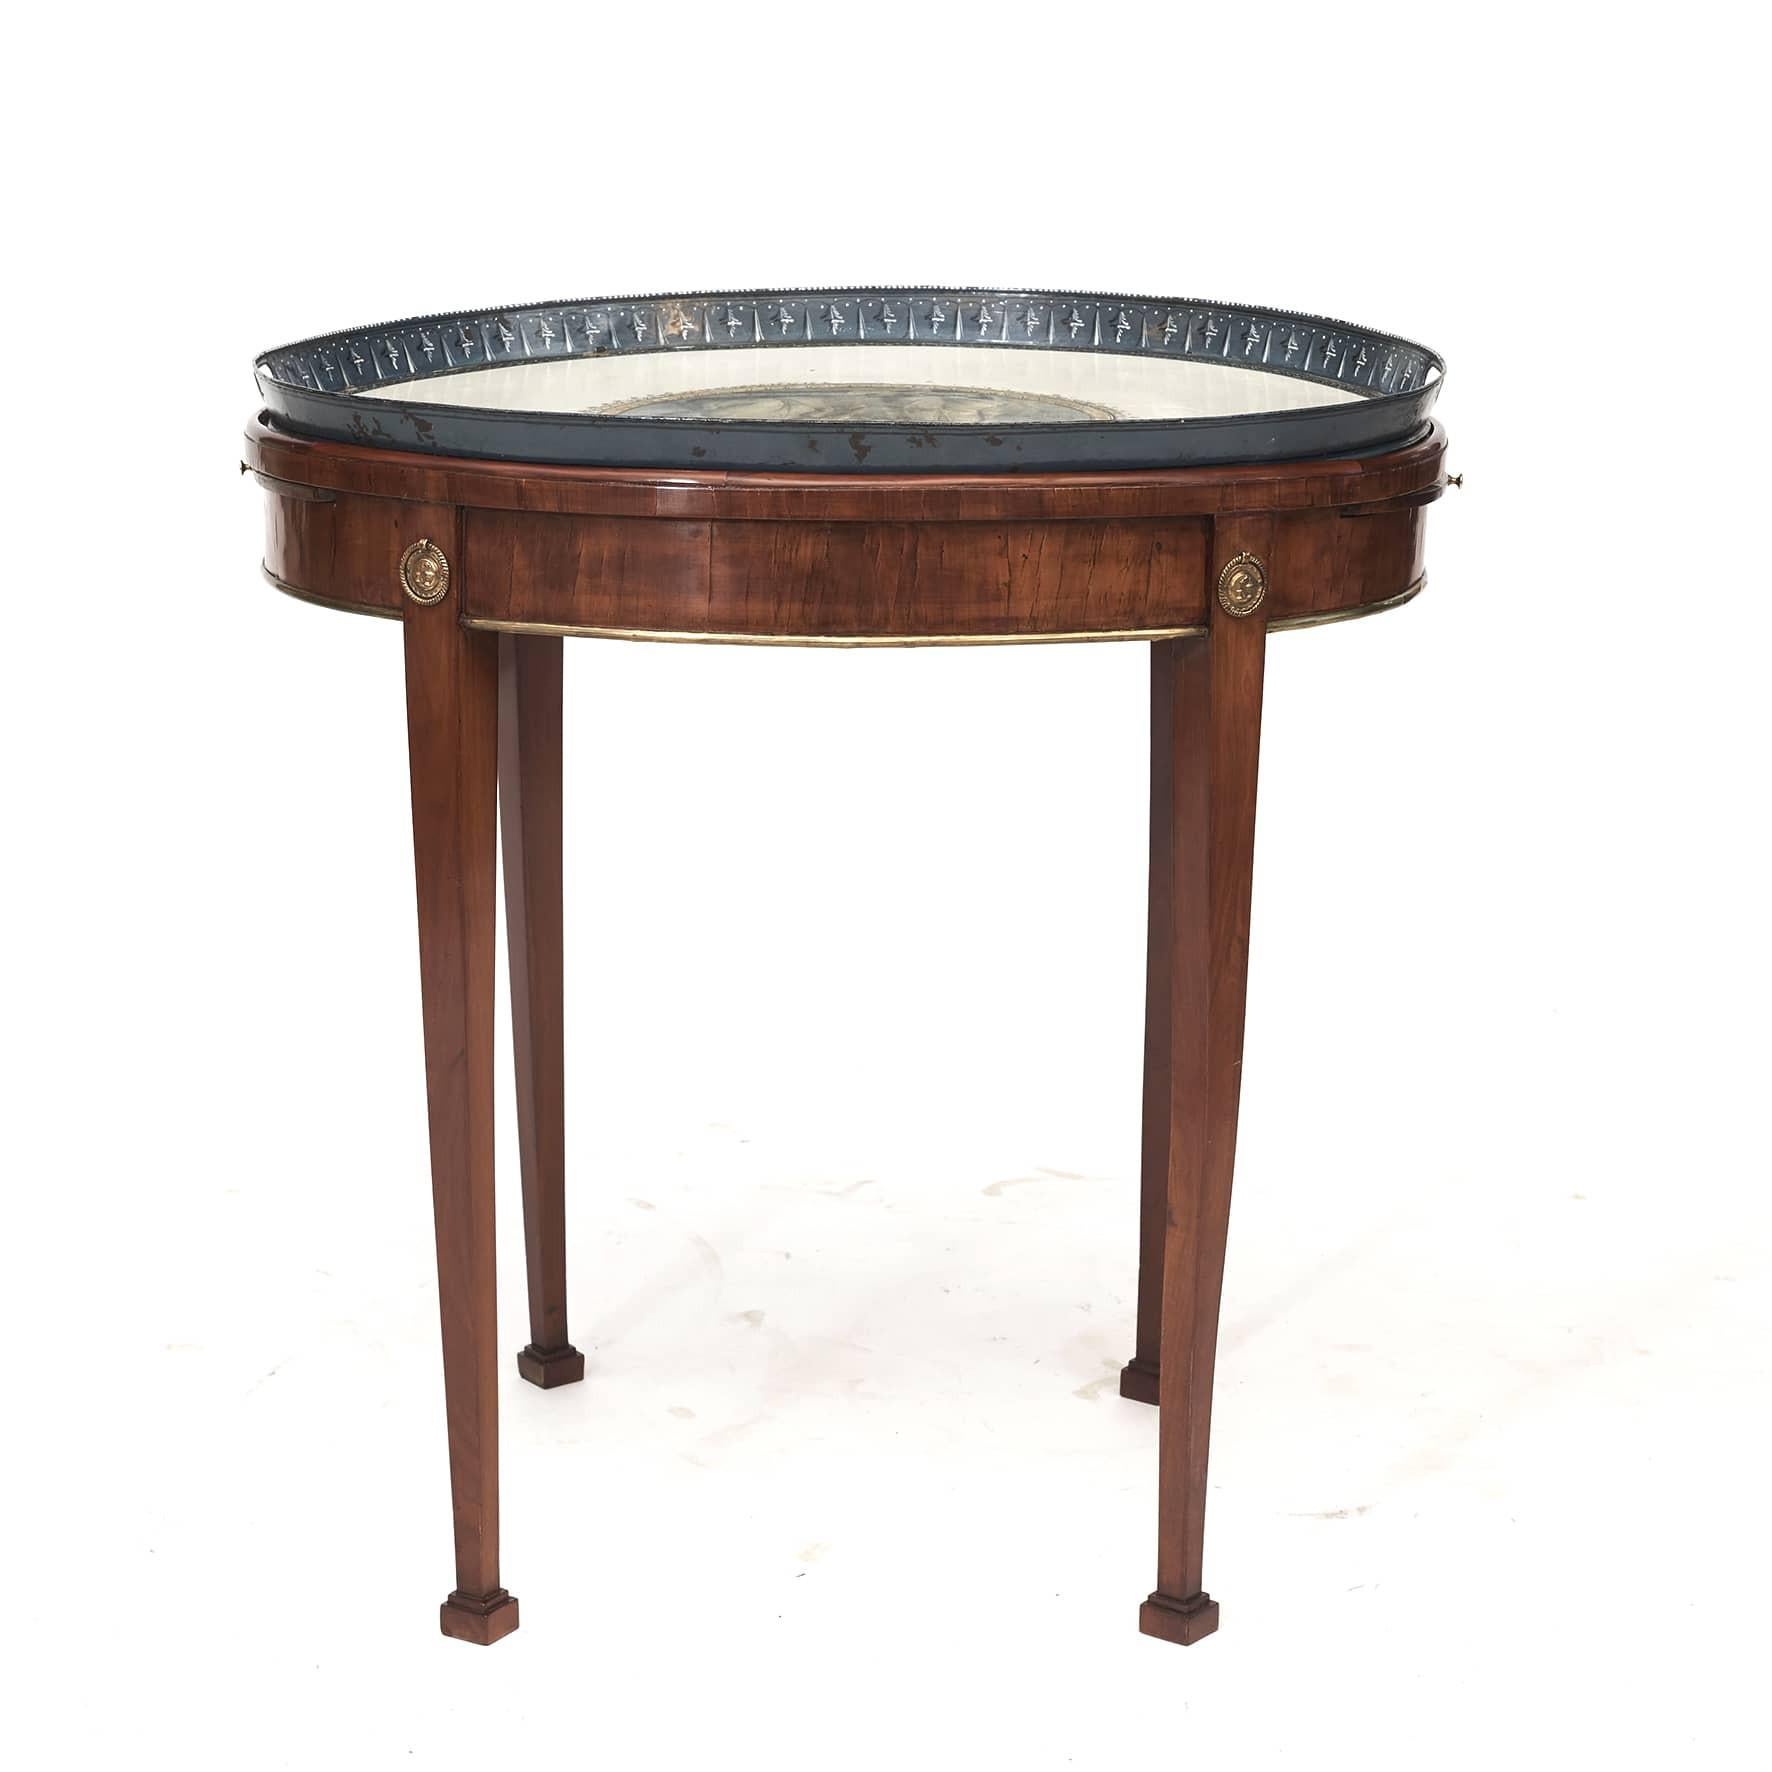 Elegant Gustavian metal tray table.
Original oval metal tray decorated with a finely hand painted allegorical scene. Standing rim with pierced handle grips.
Mahogany body, apron complimented with brass trim. Resting on four tapered legs adorned